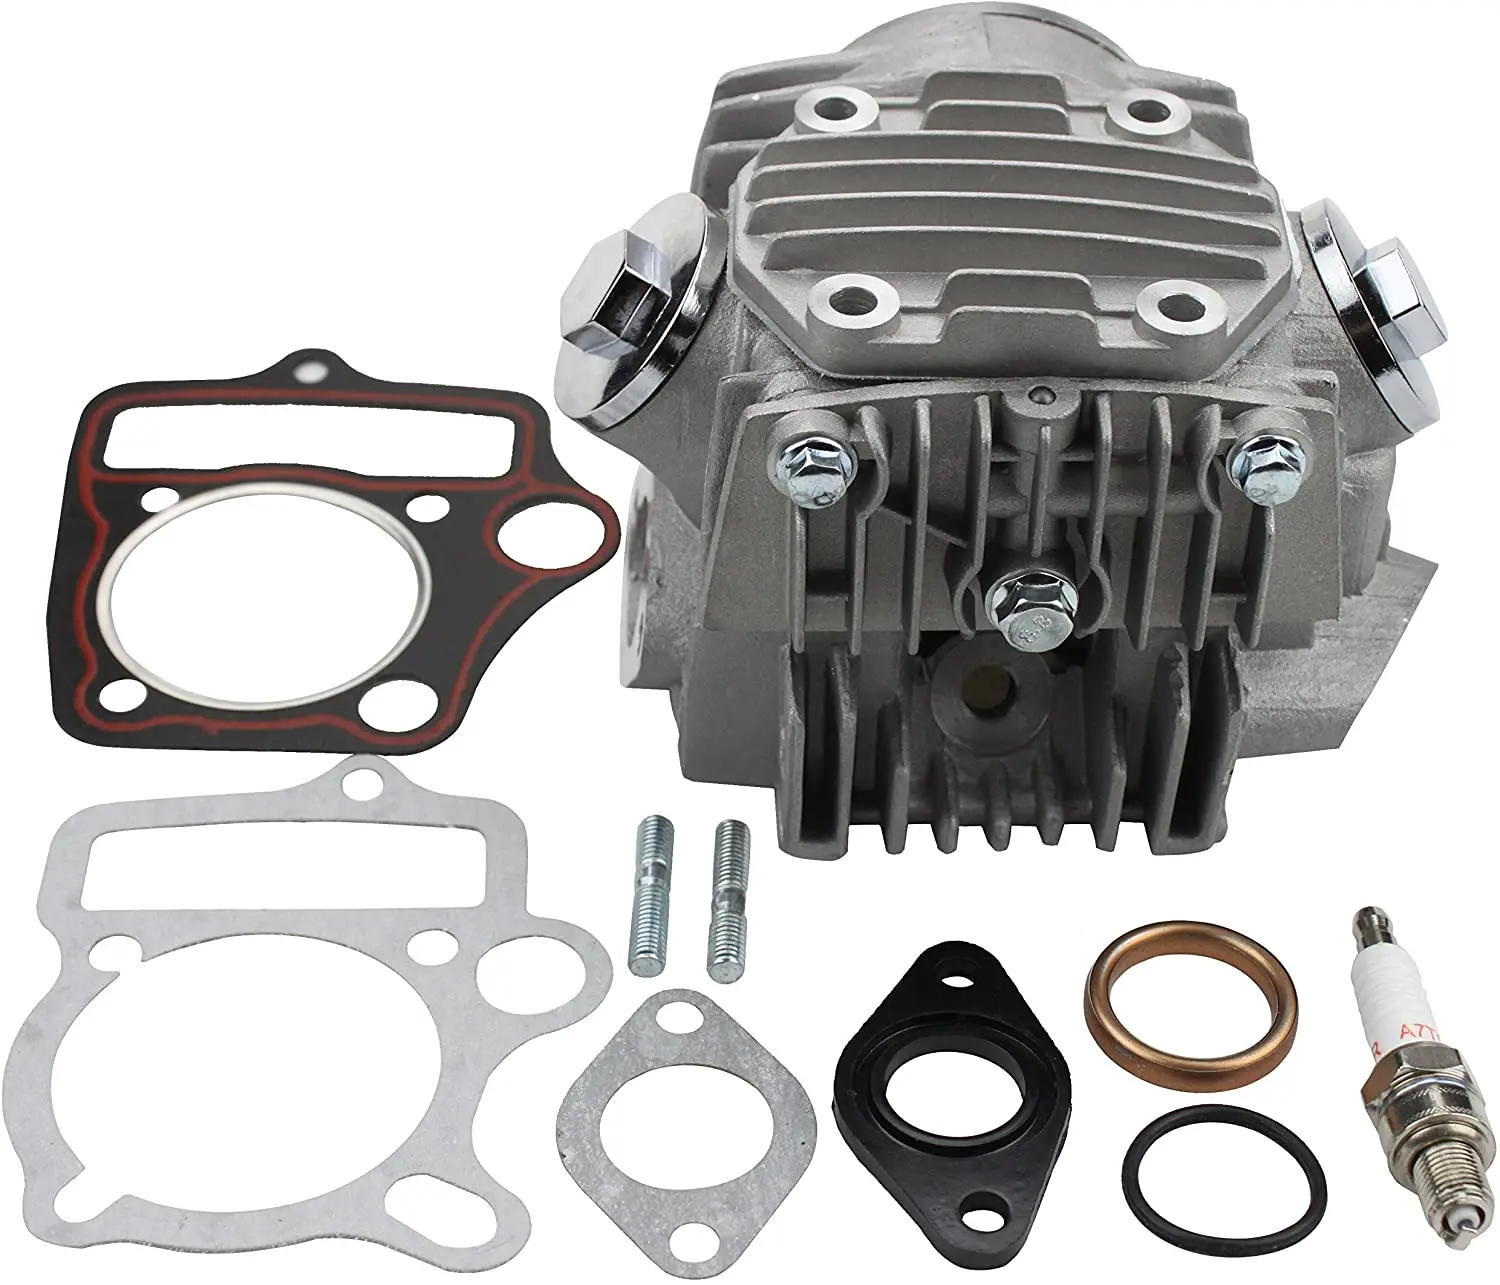 GOOFIT 52.4mm Engine Cylinder Big Bore with Piston Kit and Gaskets Replacement for Lifan 125cc LF125 Horizontal Engines Dirt Pit Bike ATV 